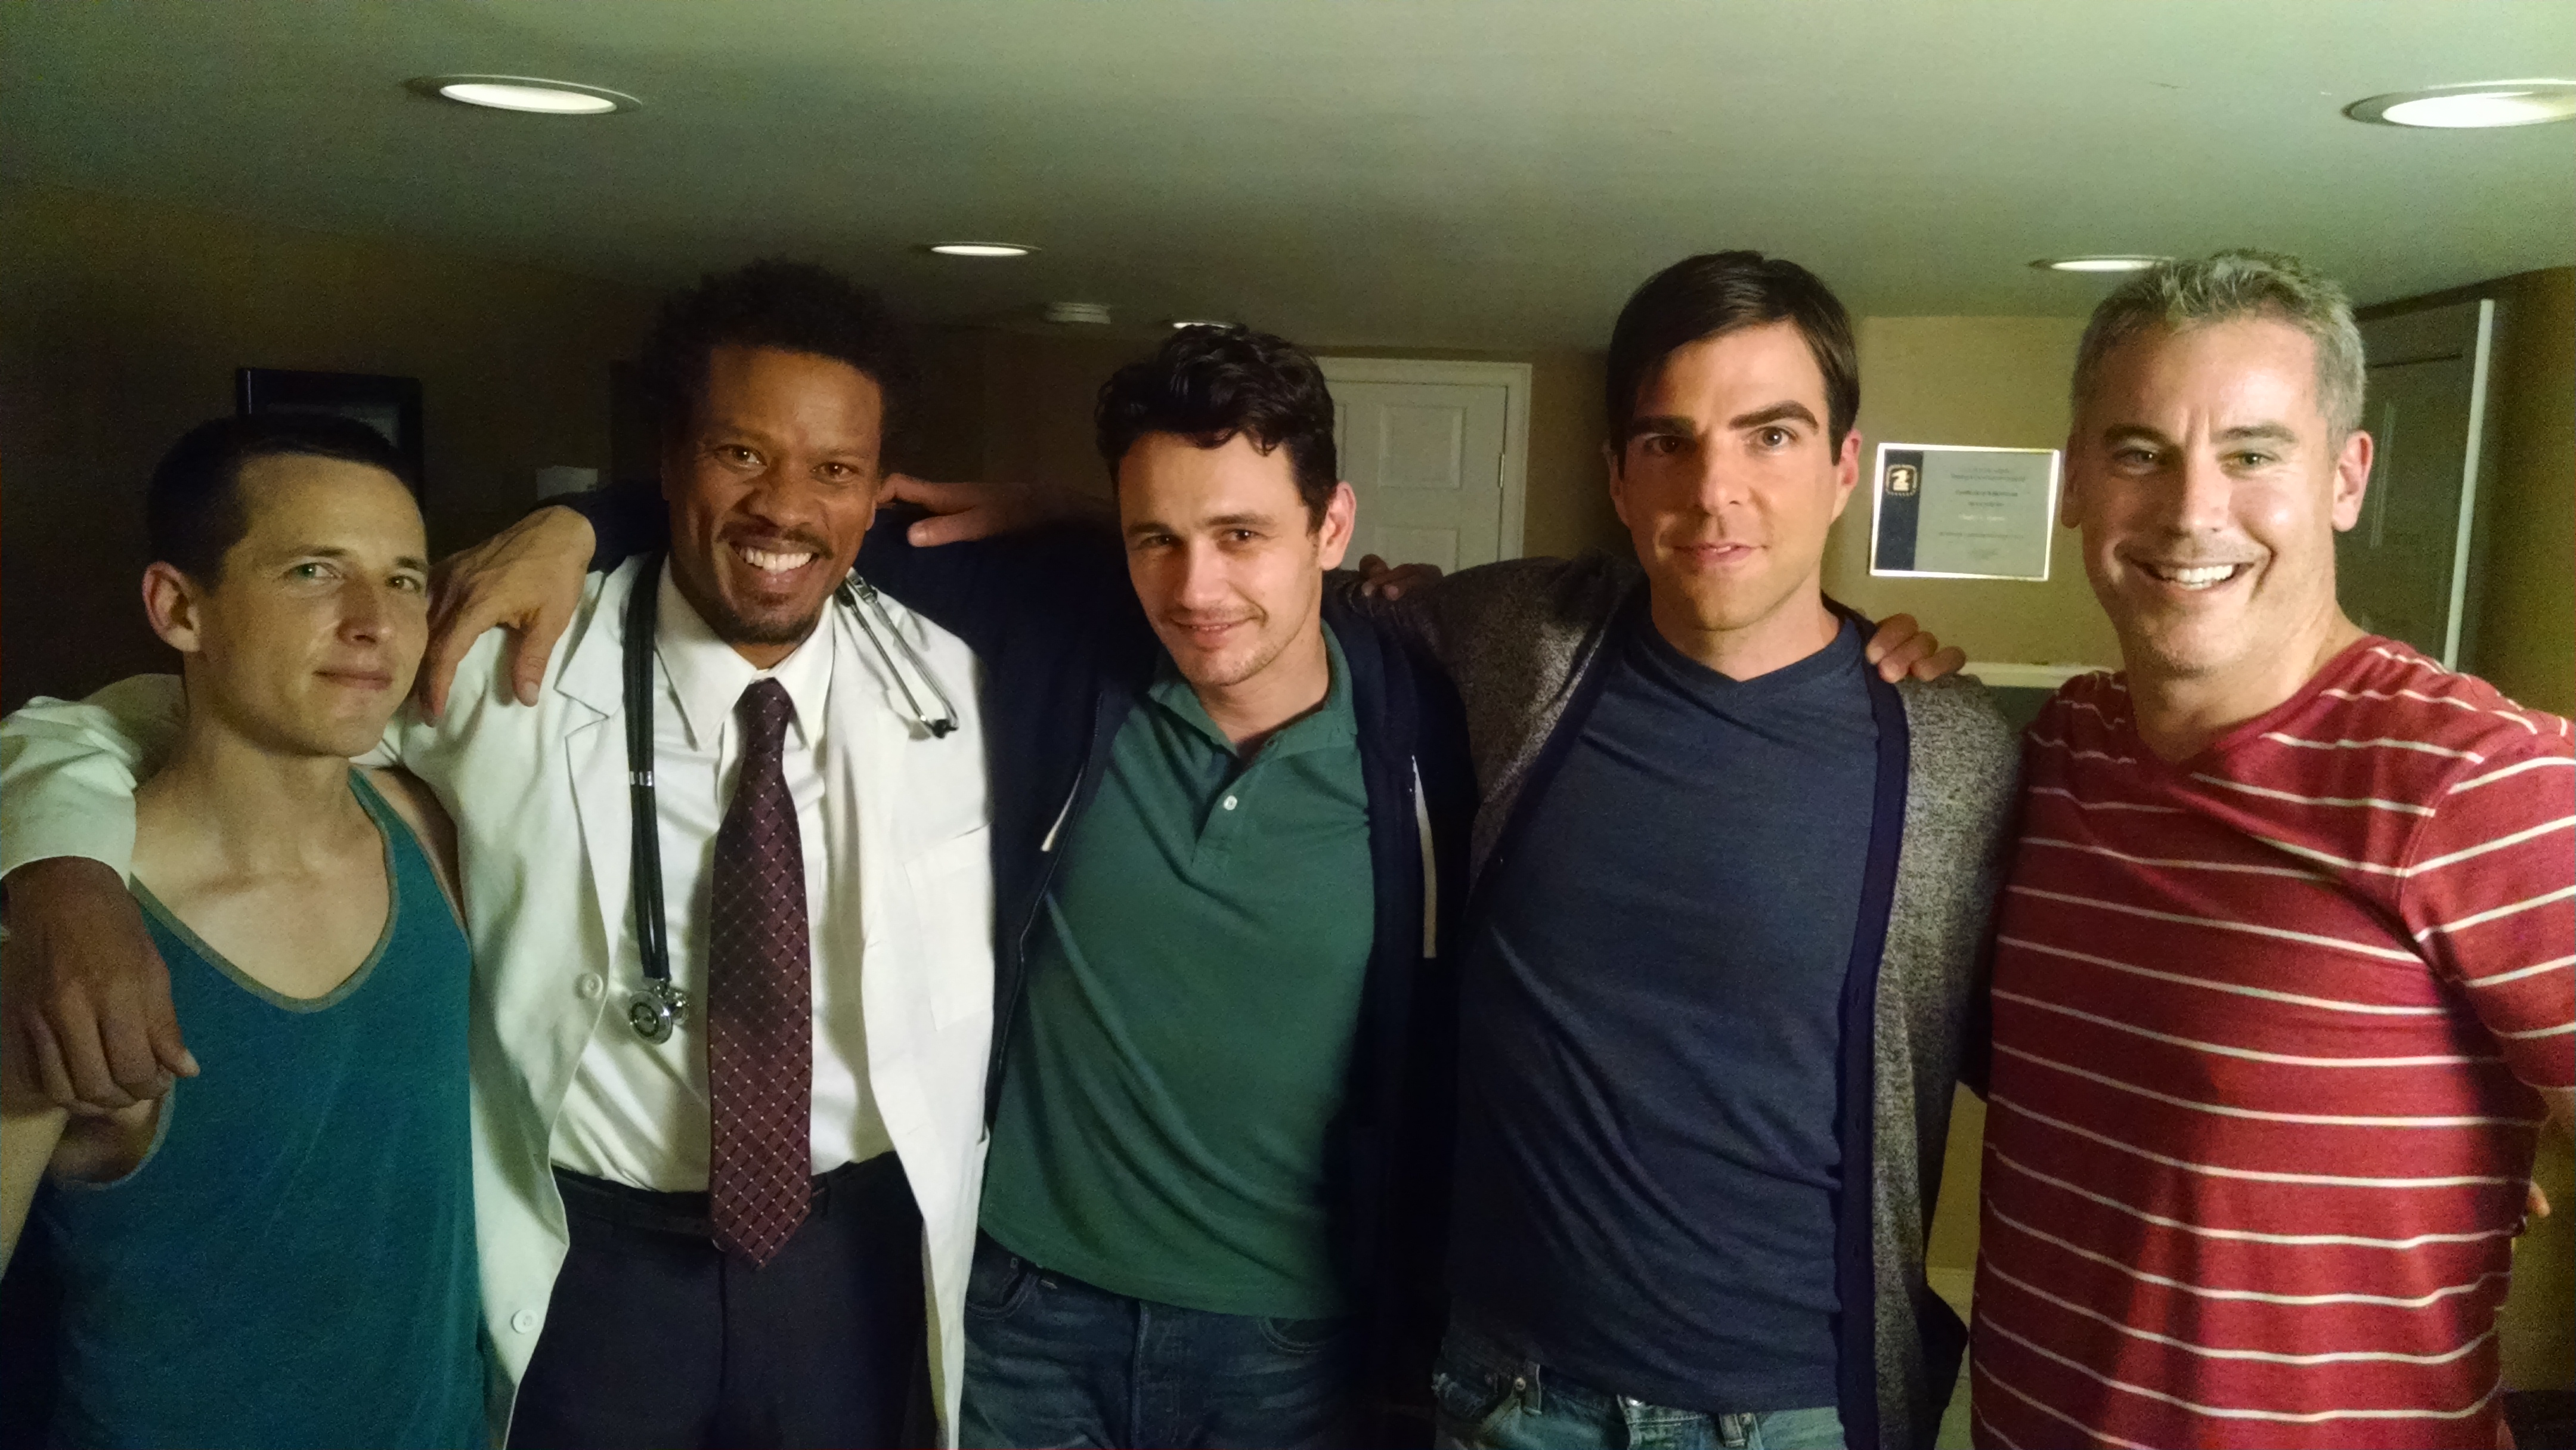 On set of Michael with director Justin Kelly,Raymond, James, Zach and producer Vince Jolivette